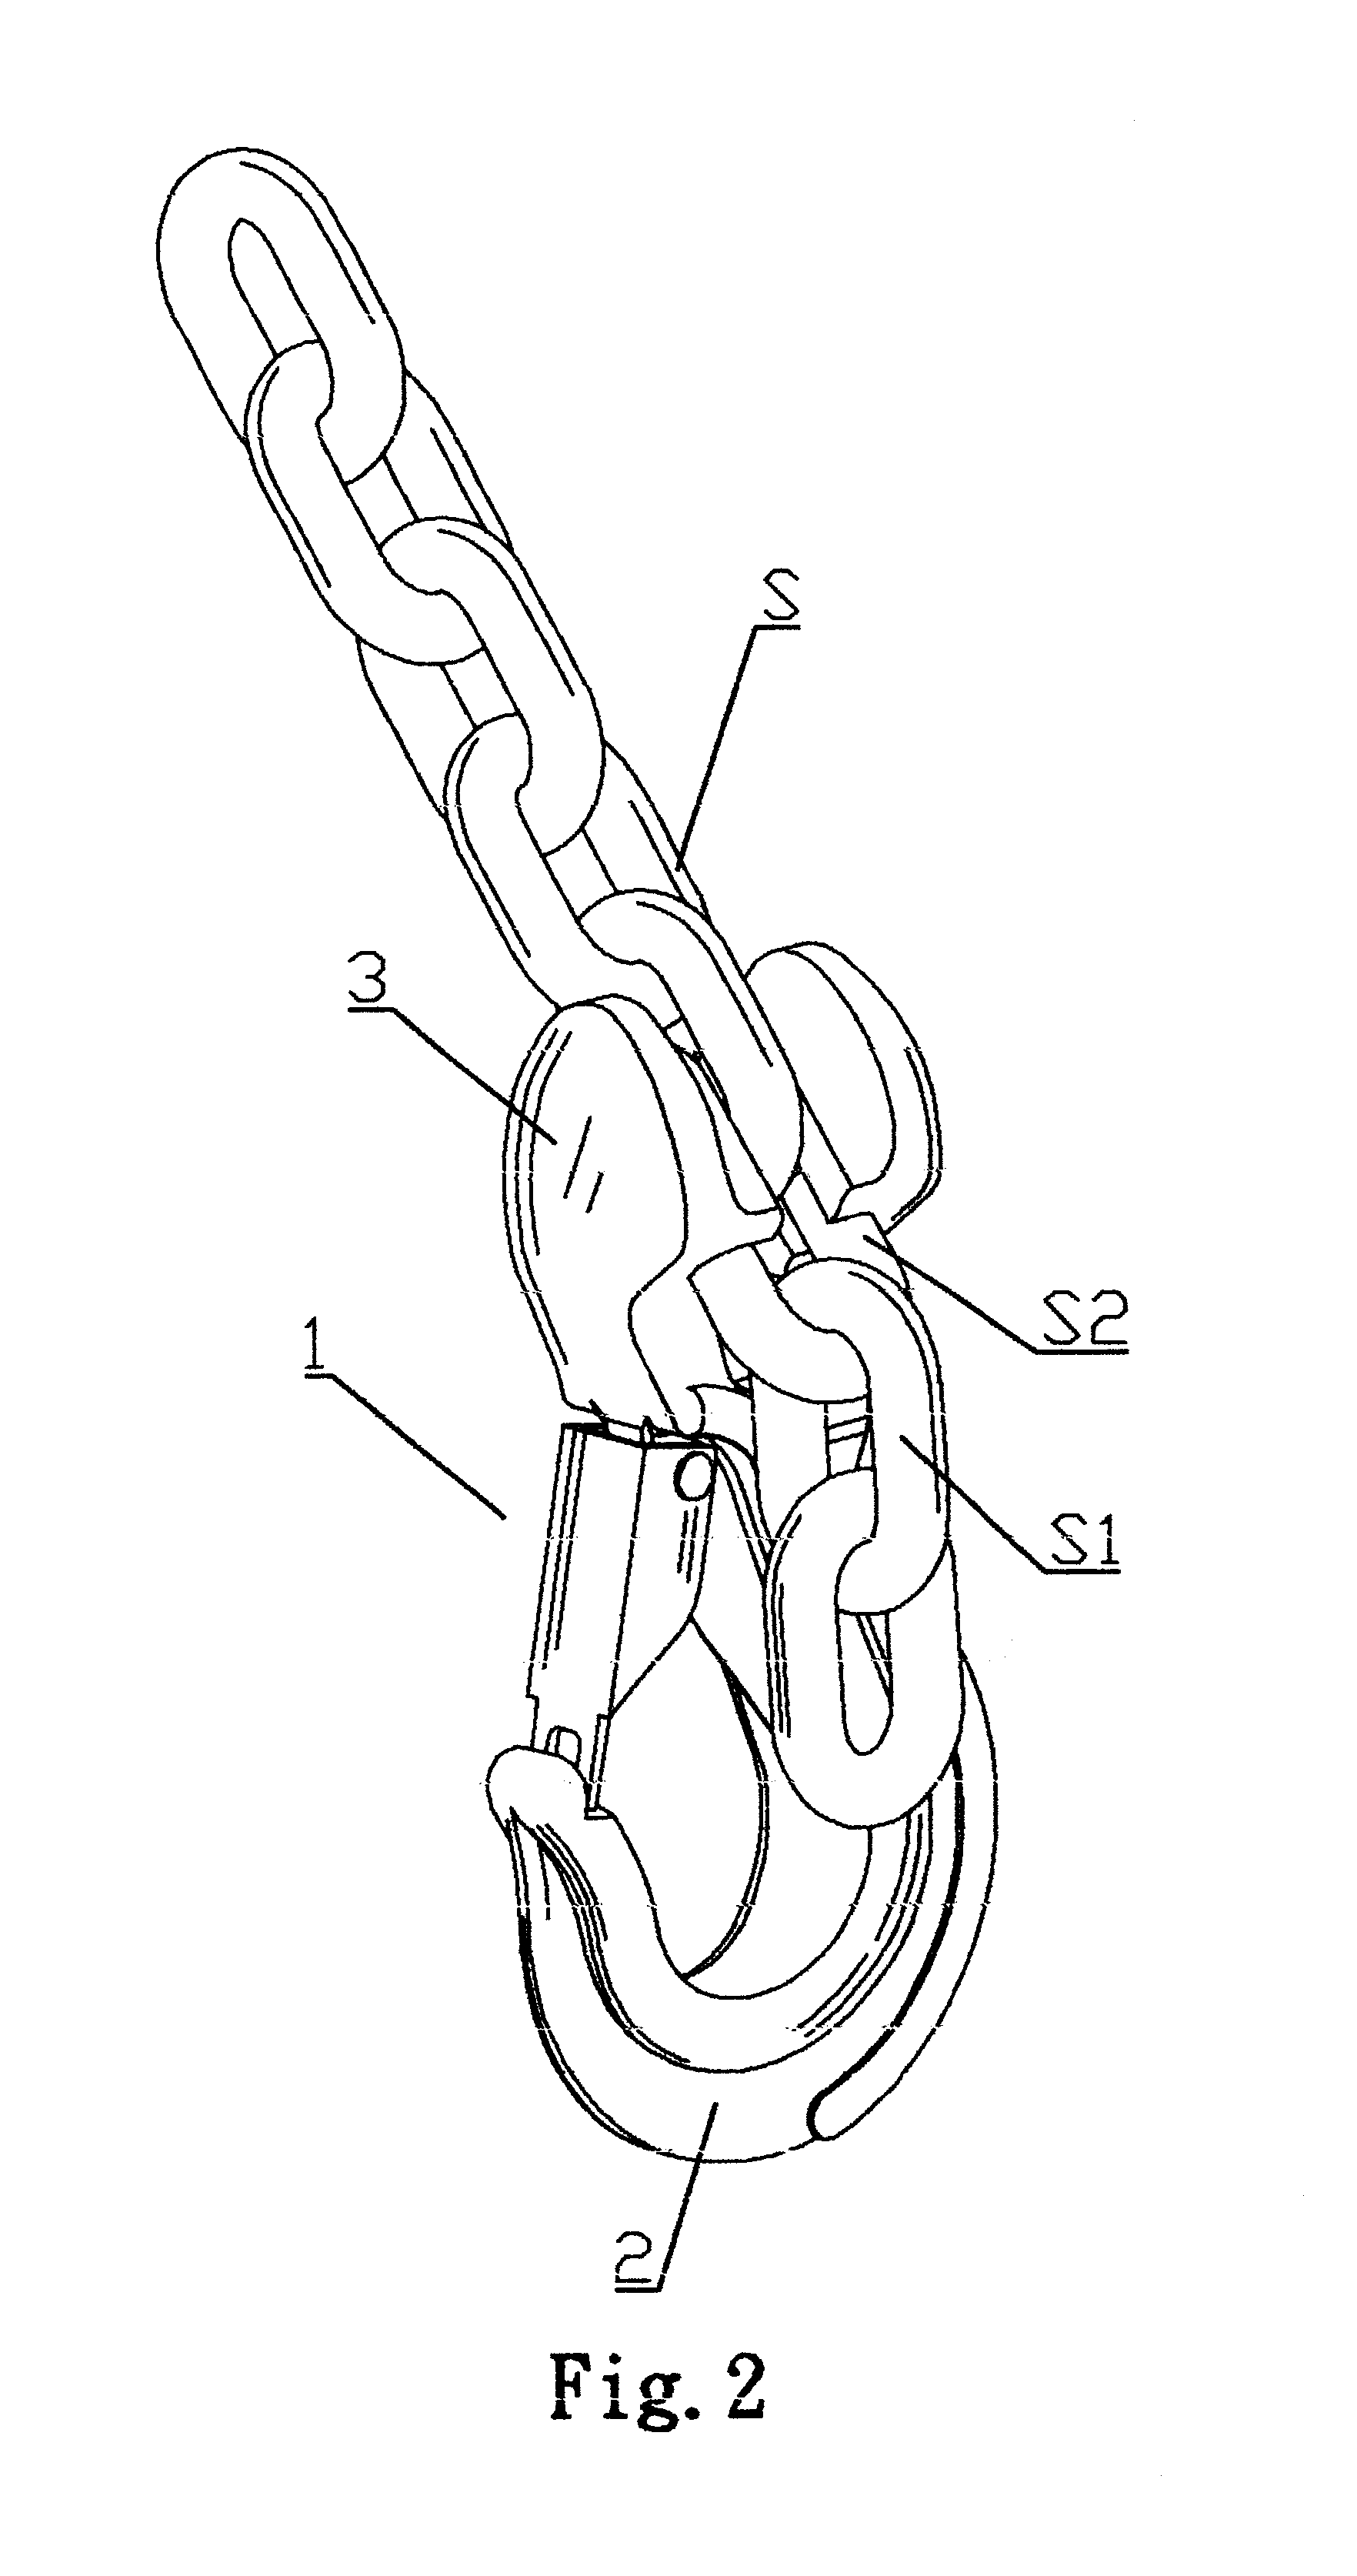 Hook capable of hooking chain at desired length